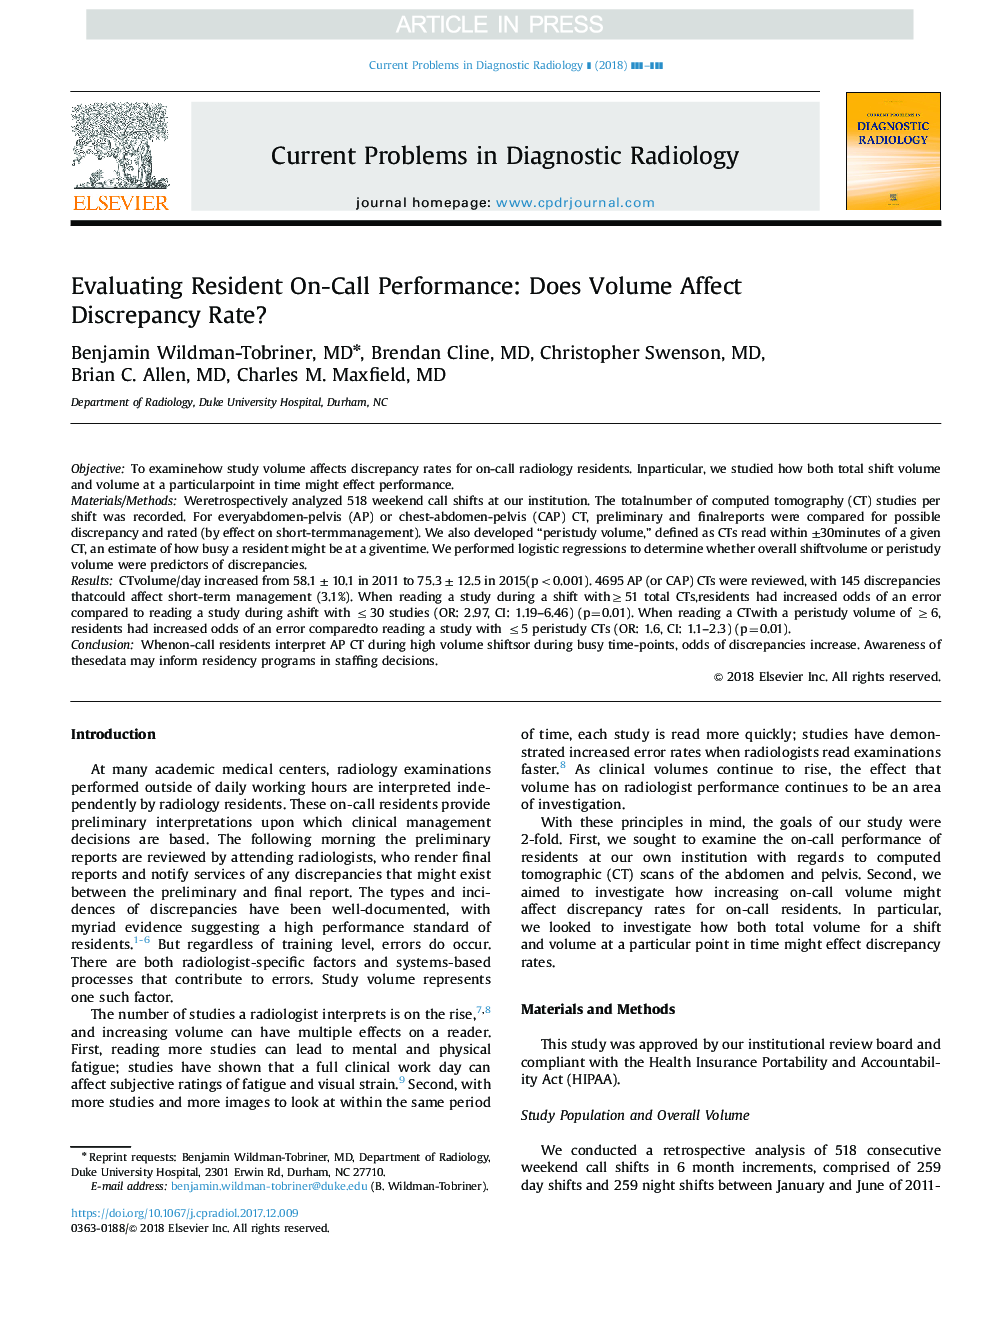 Evaluating Resident On-Call Performance: Does Volume Affect Discrepancy Rate?